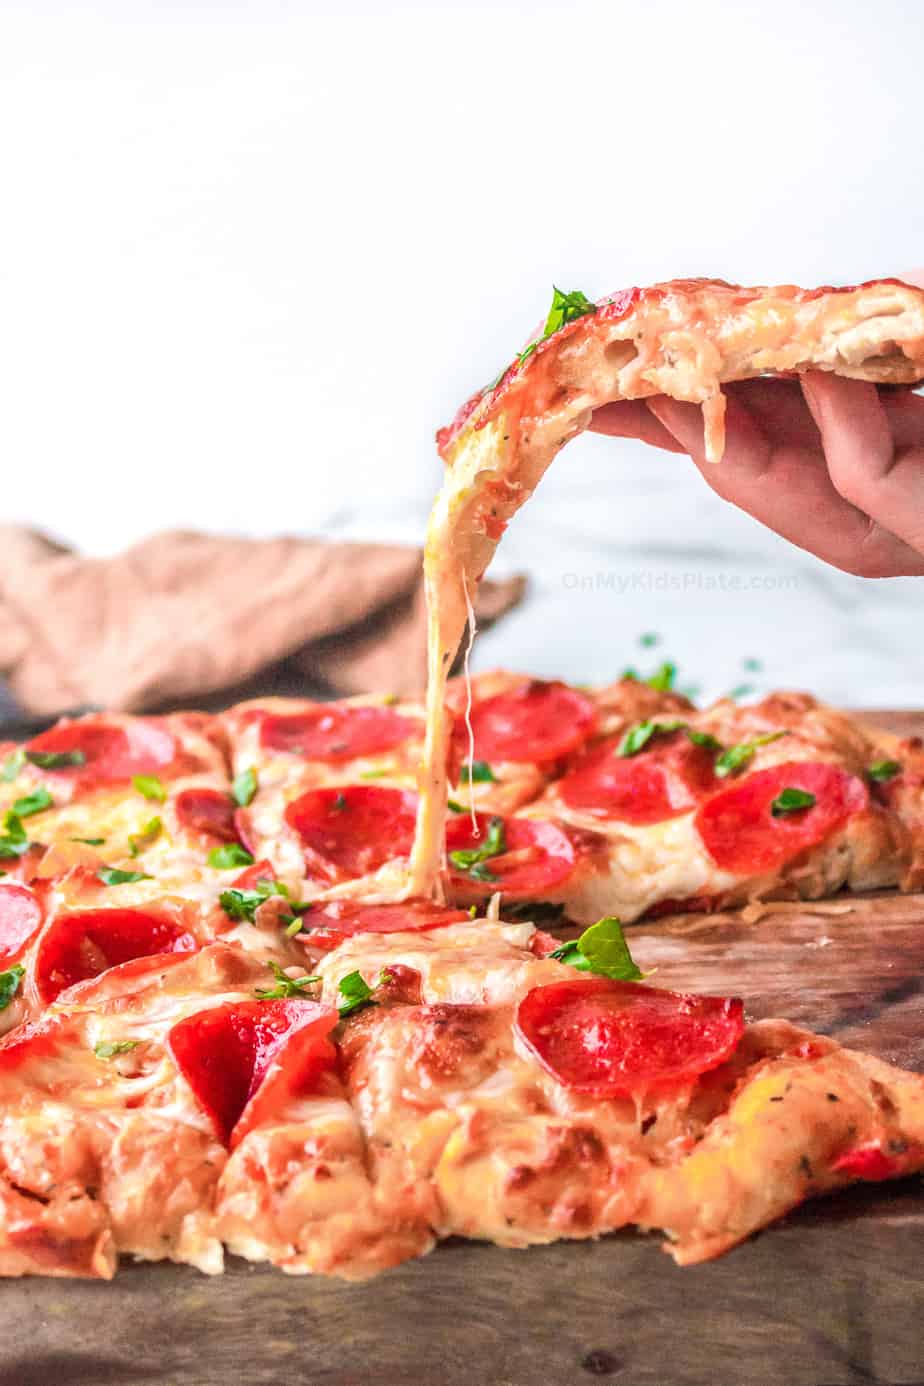 A hand pulls a slice of pizza up from a full pie with the melted cheese stretching